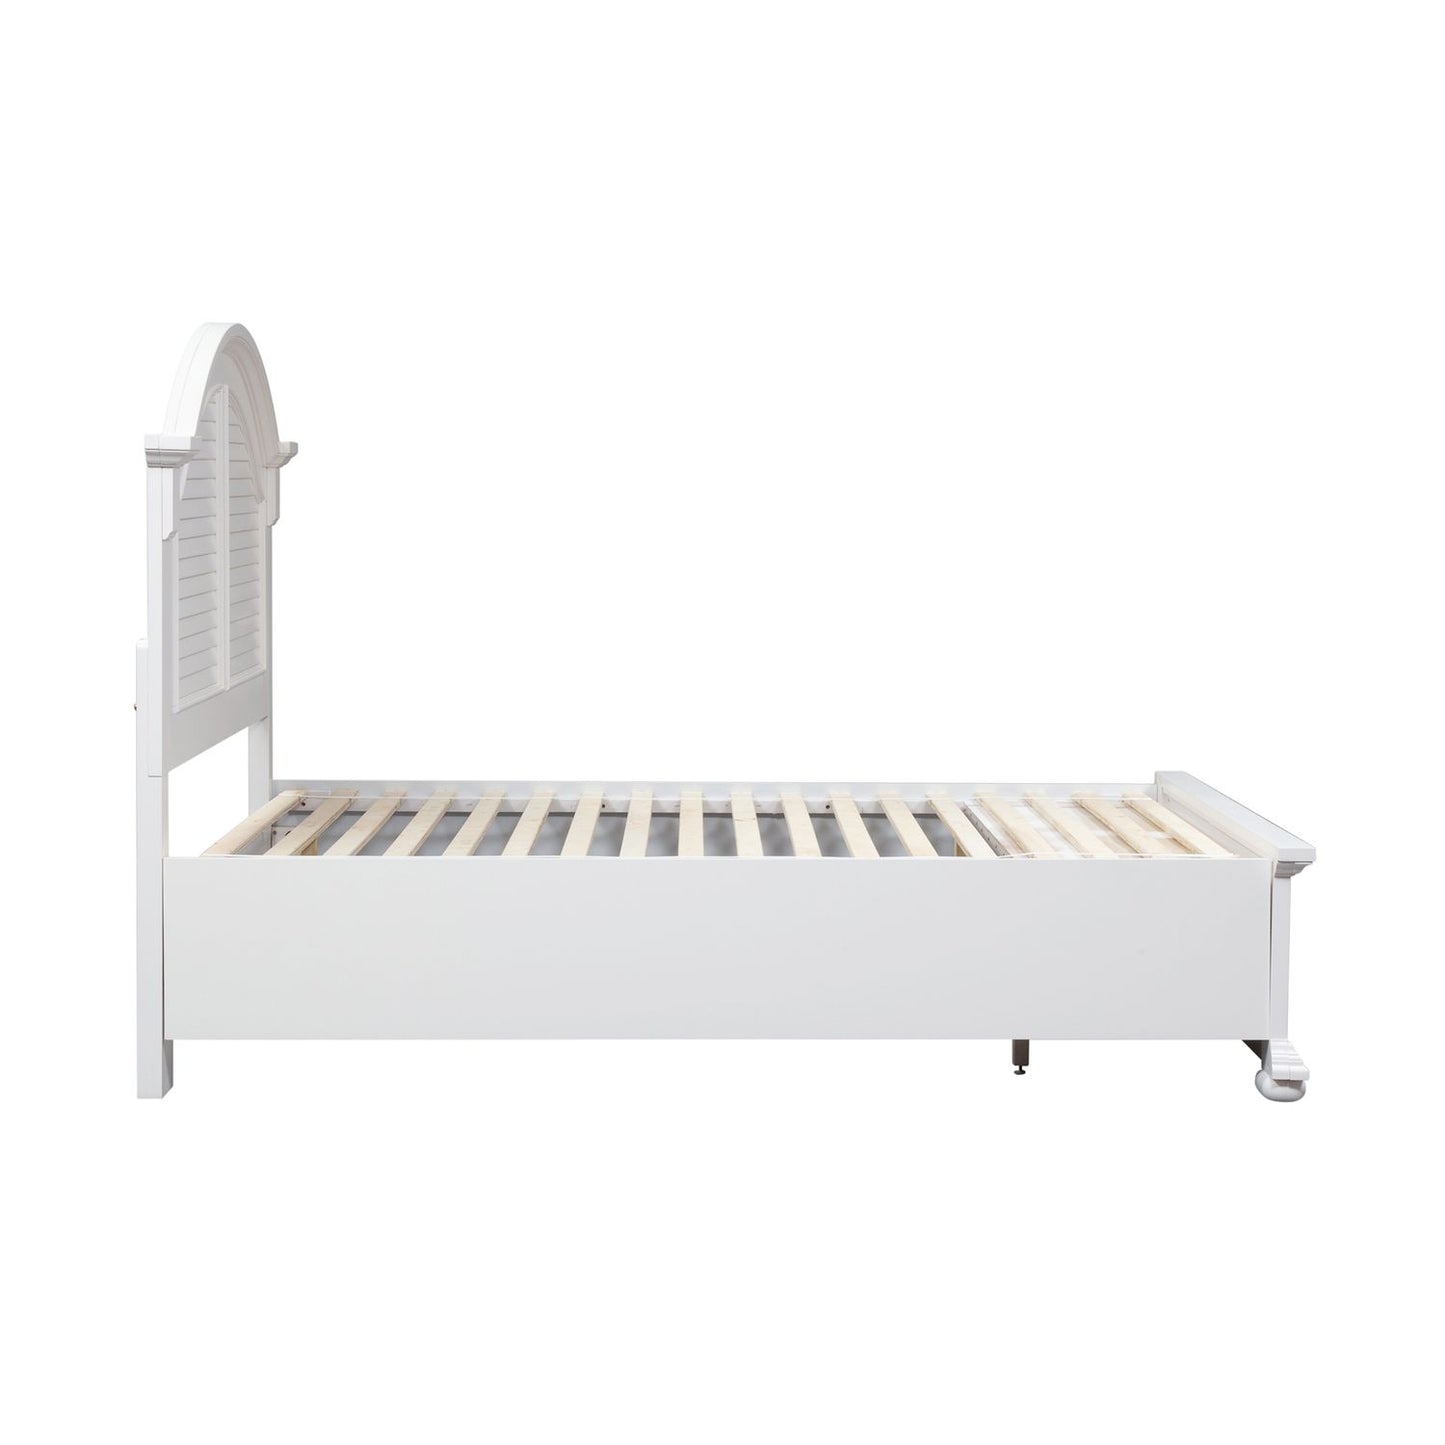 Summer House I - Queen Storage Bed